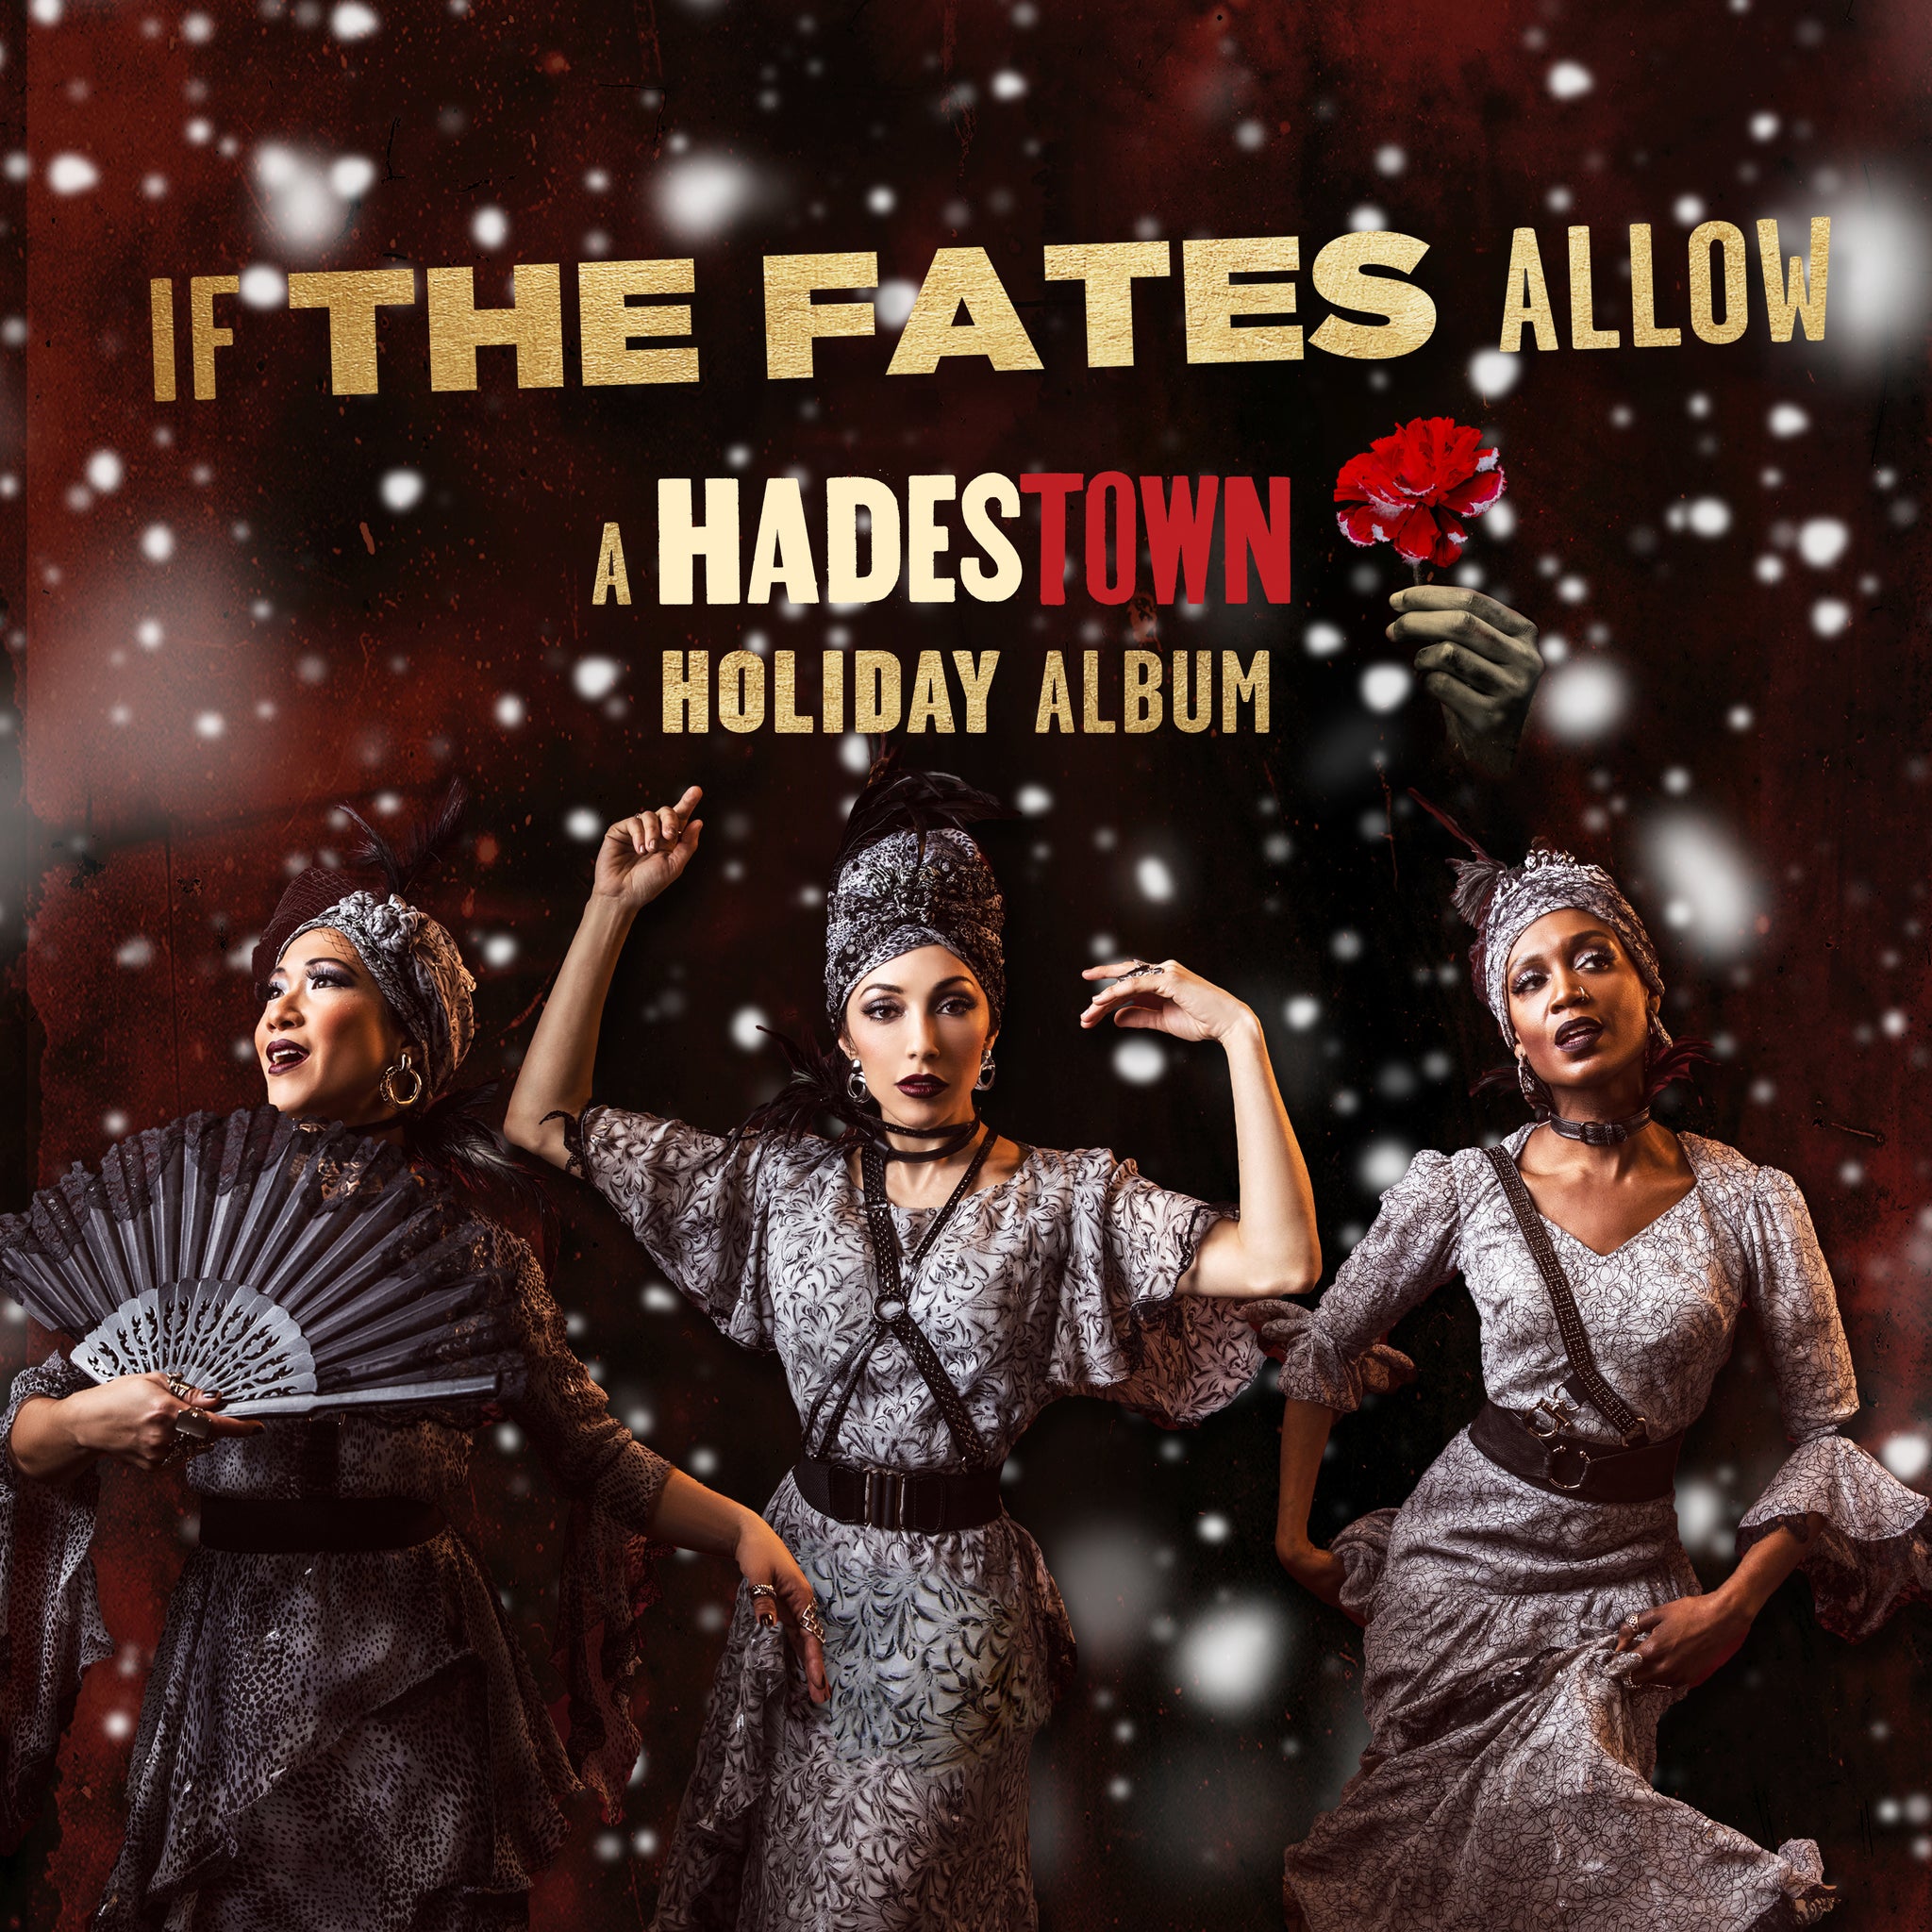 If The Fates Allow: A Hadestown Holiday Album [CD]